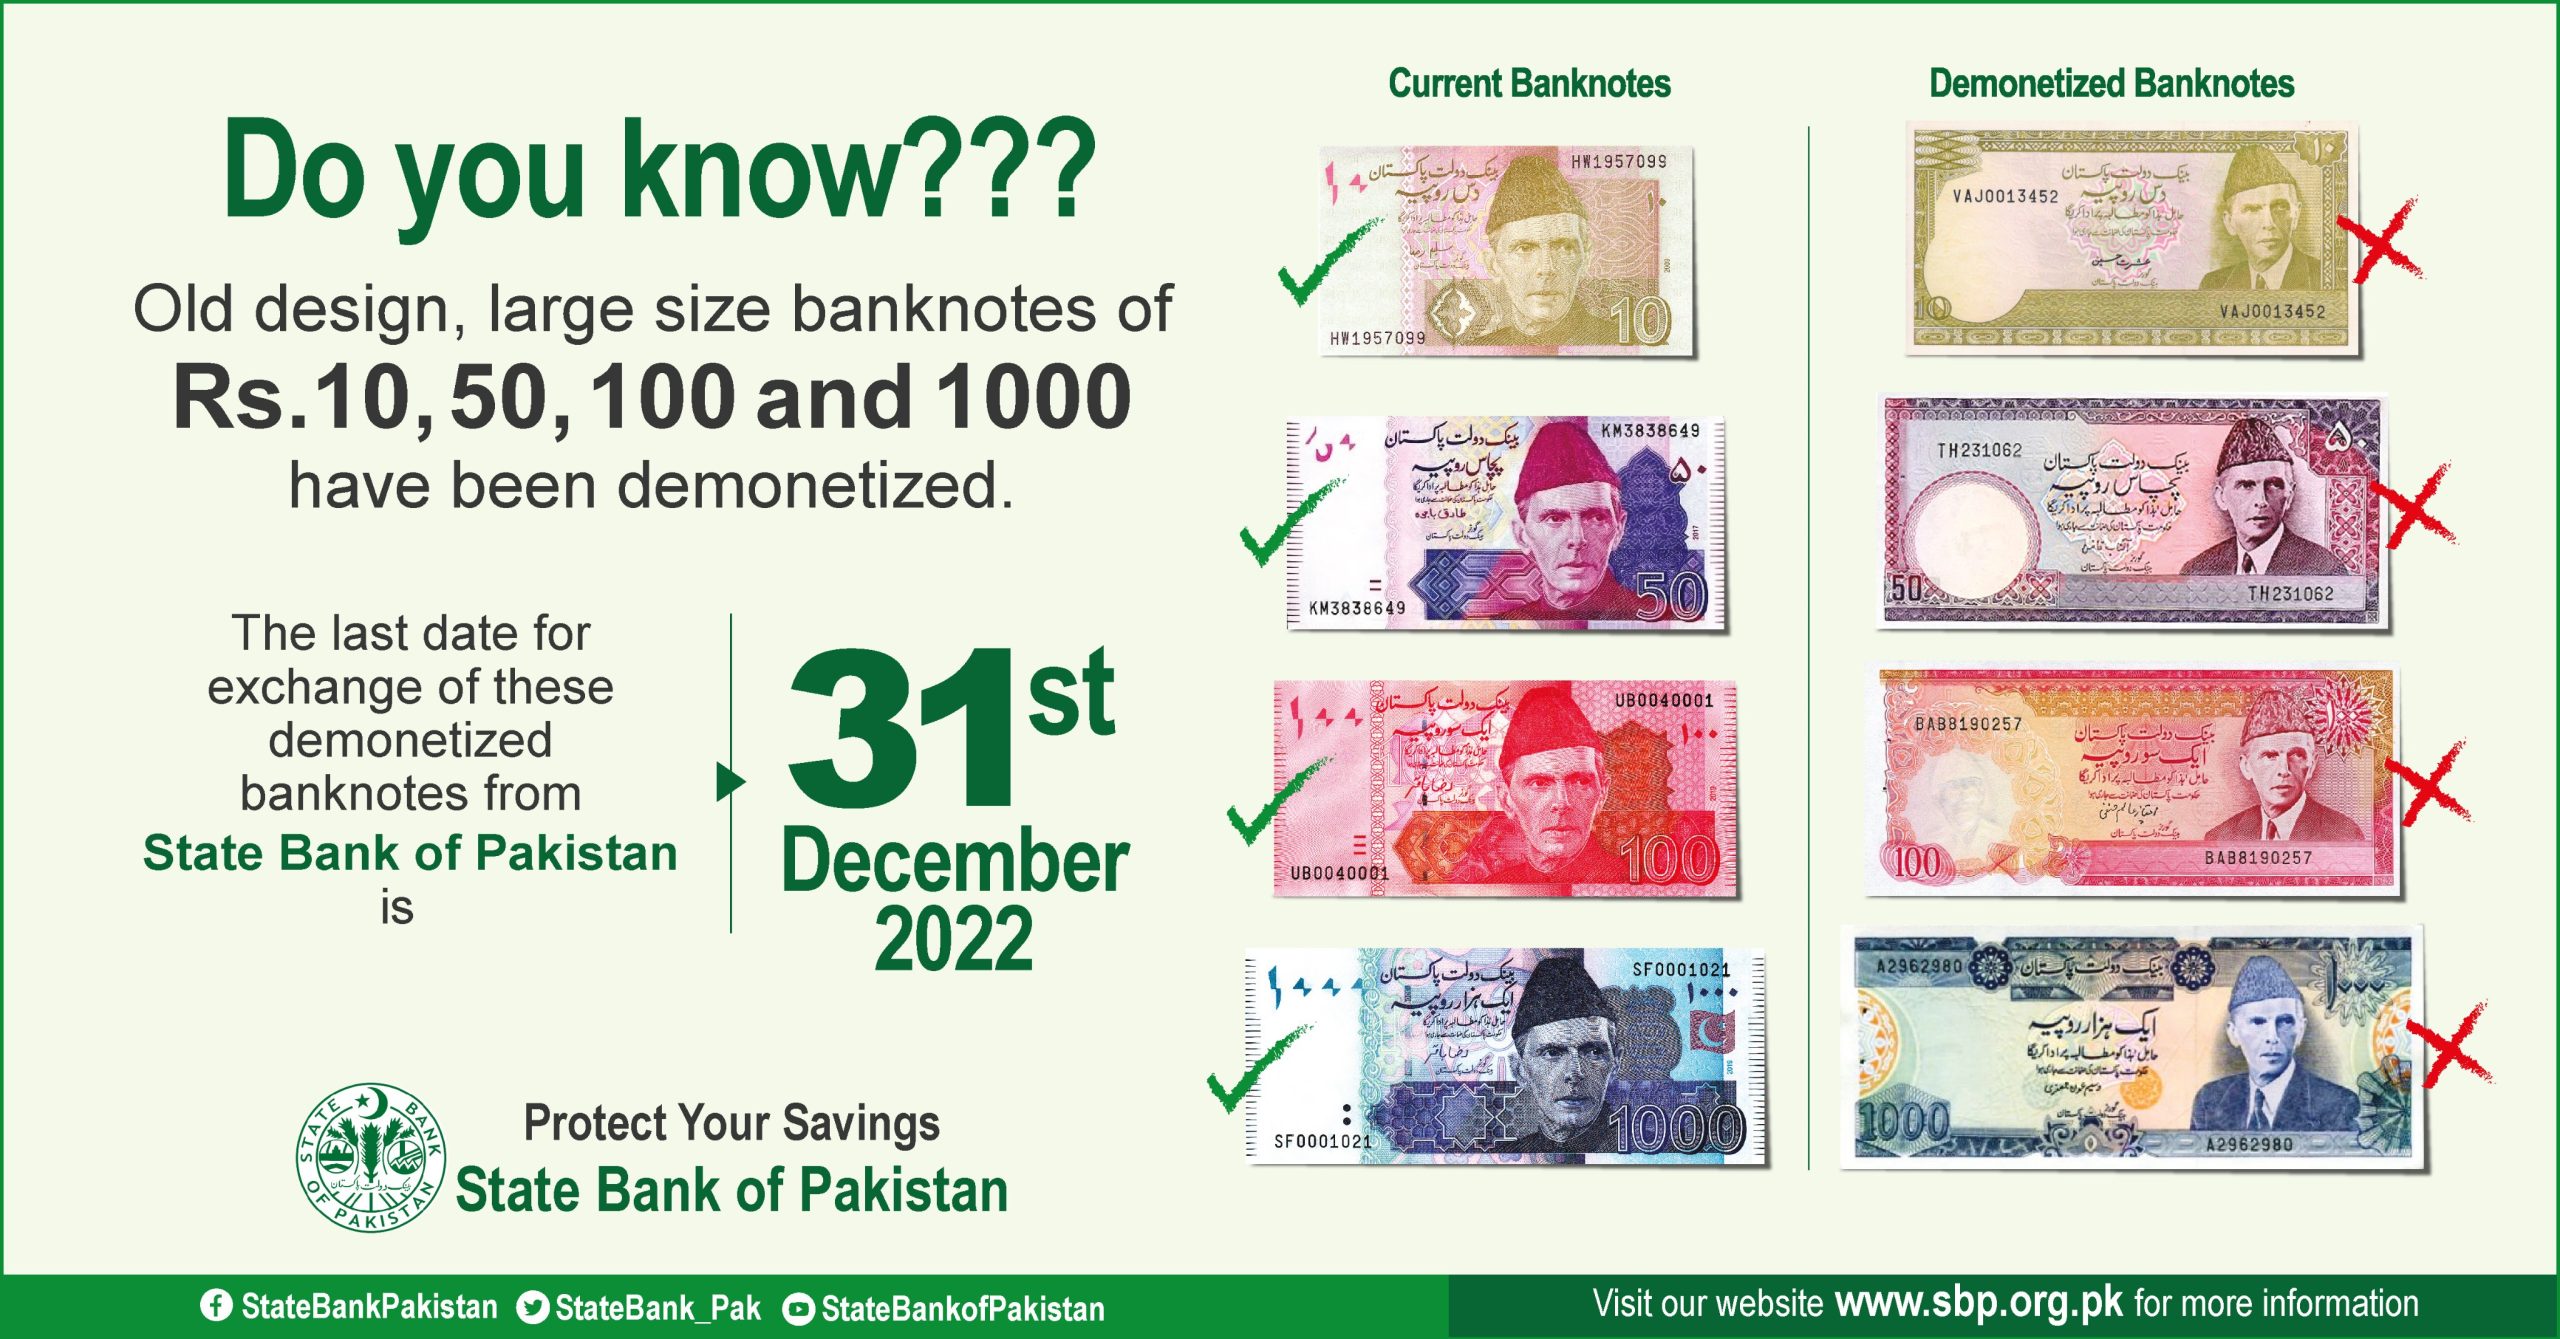 Old design large-size banknotes cannot be exchanged after Dec 31: SBP